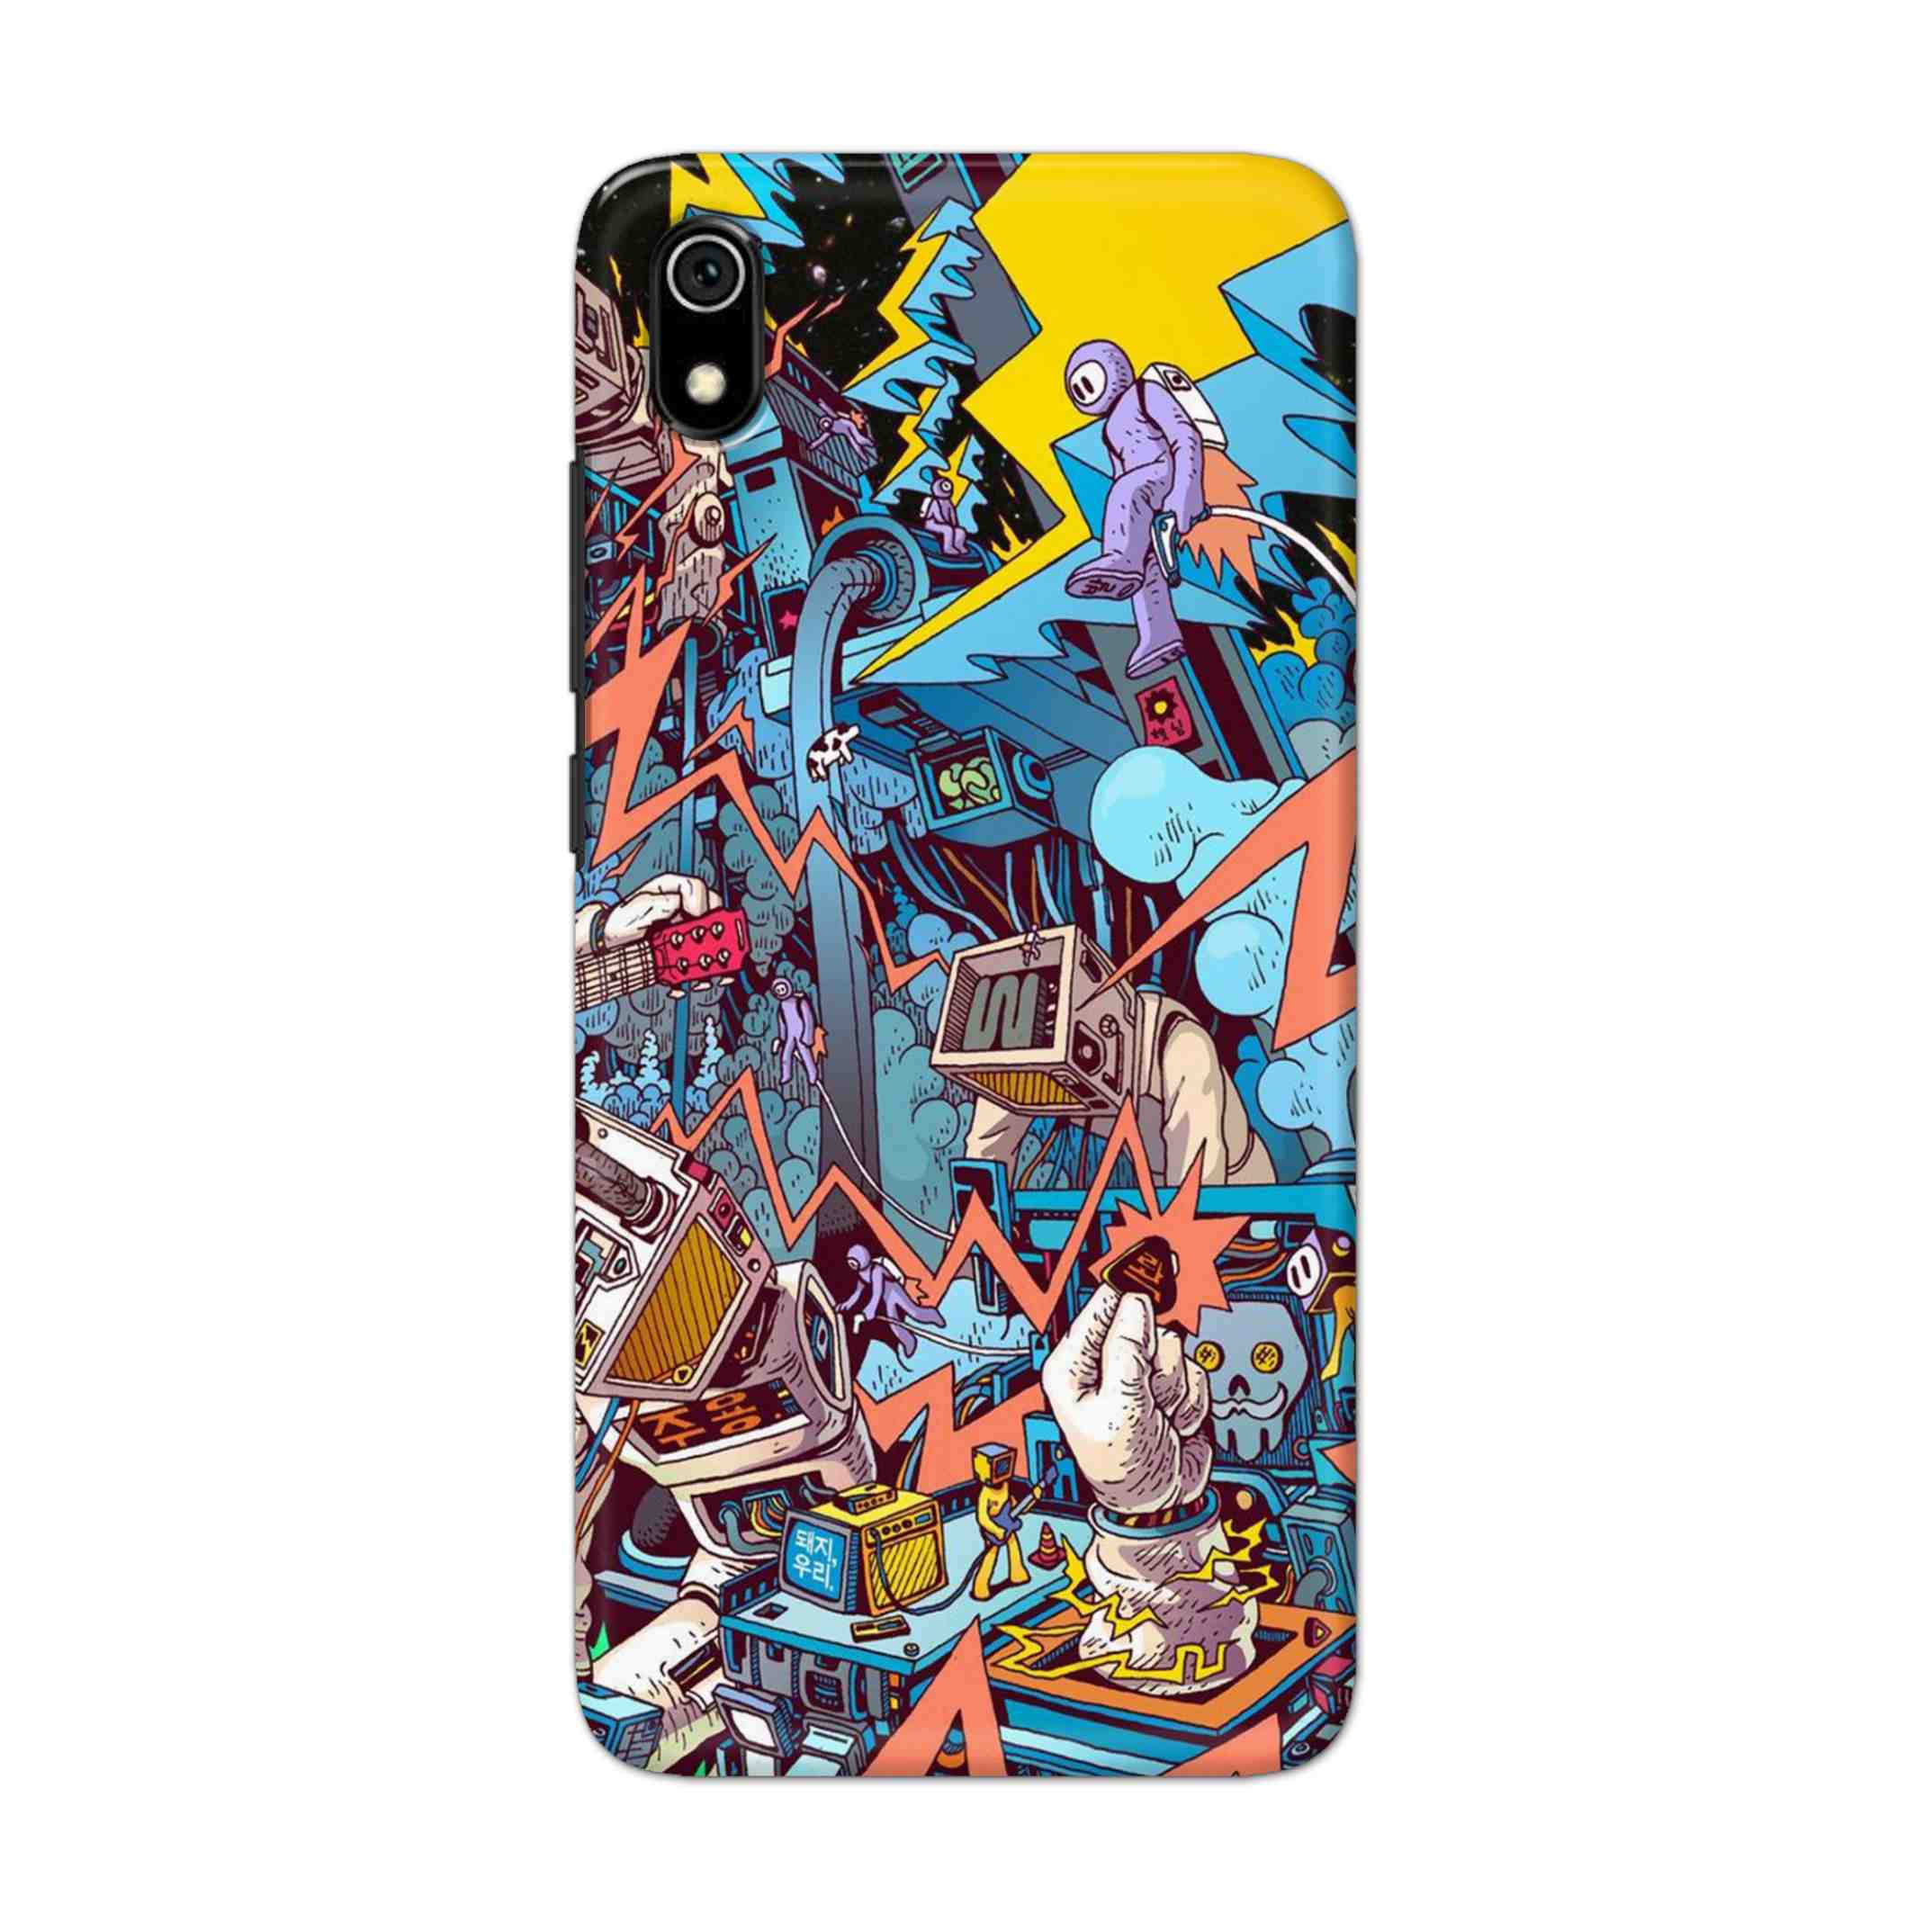 Buy Ofo Panic Hard Back Mobile Phone Case Cover For Xiaomi Redmi 7A Online